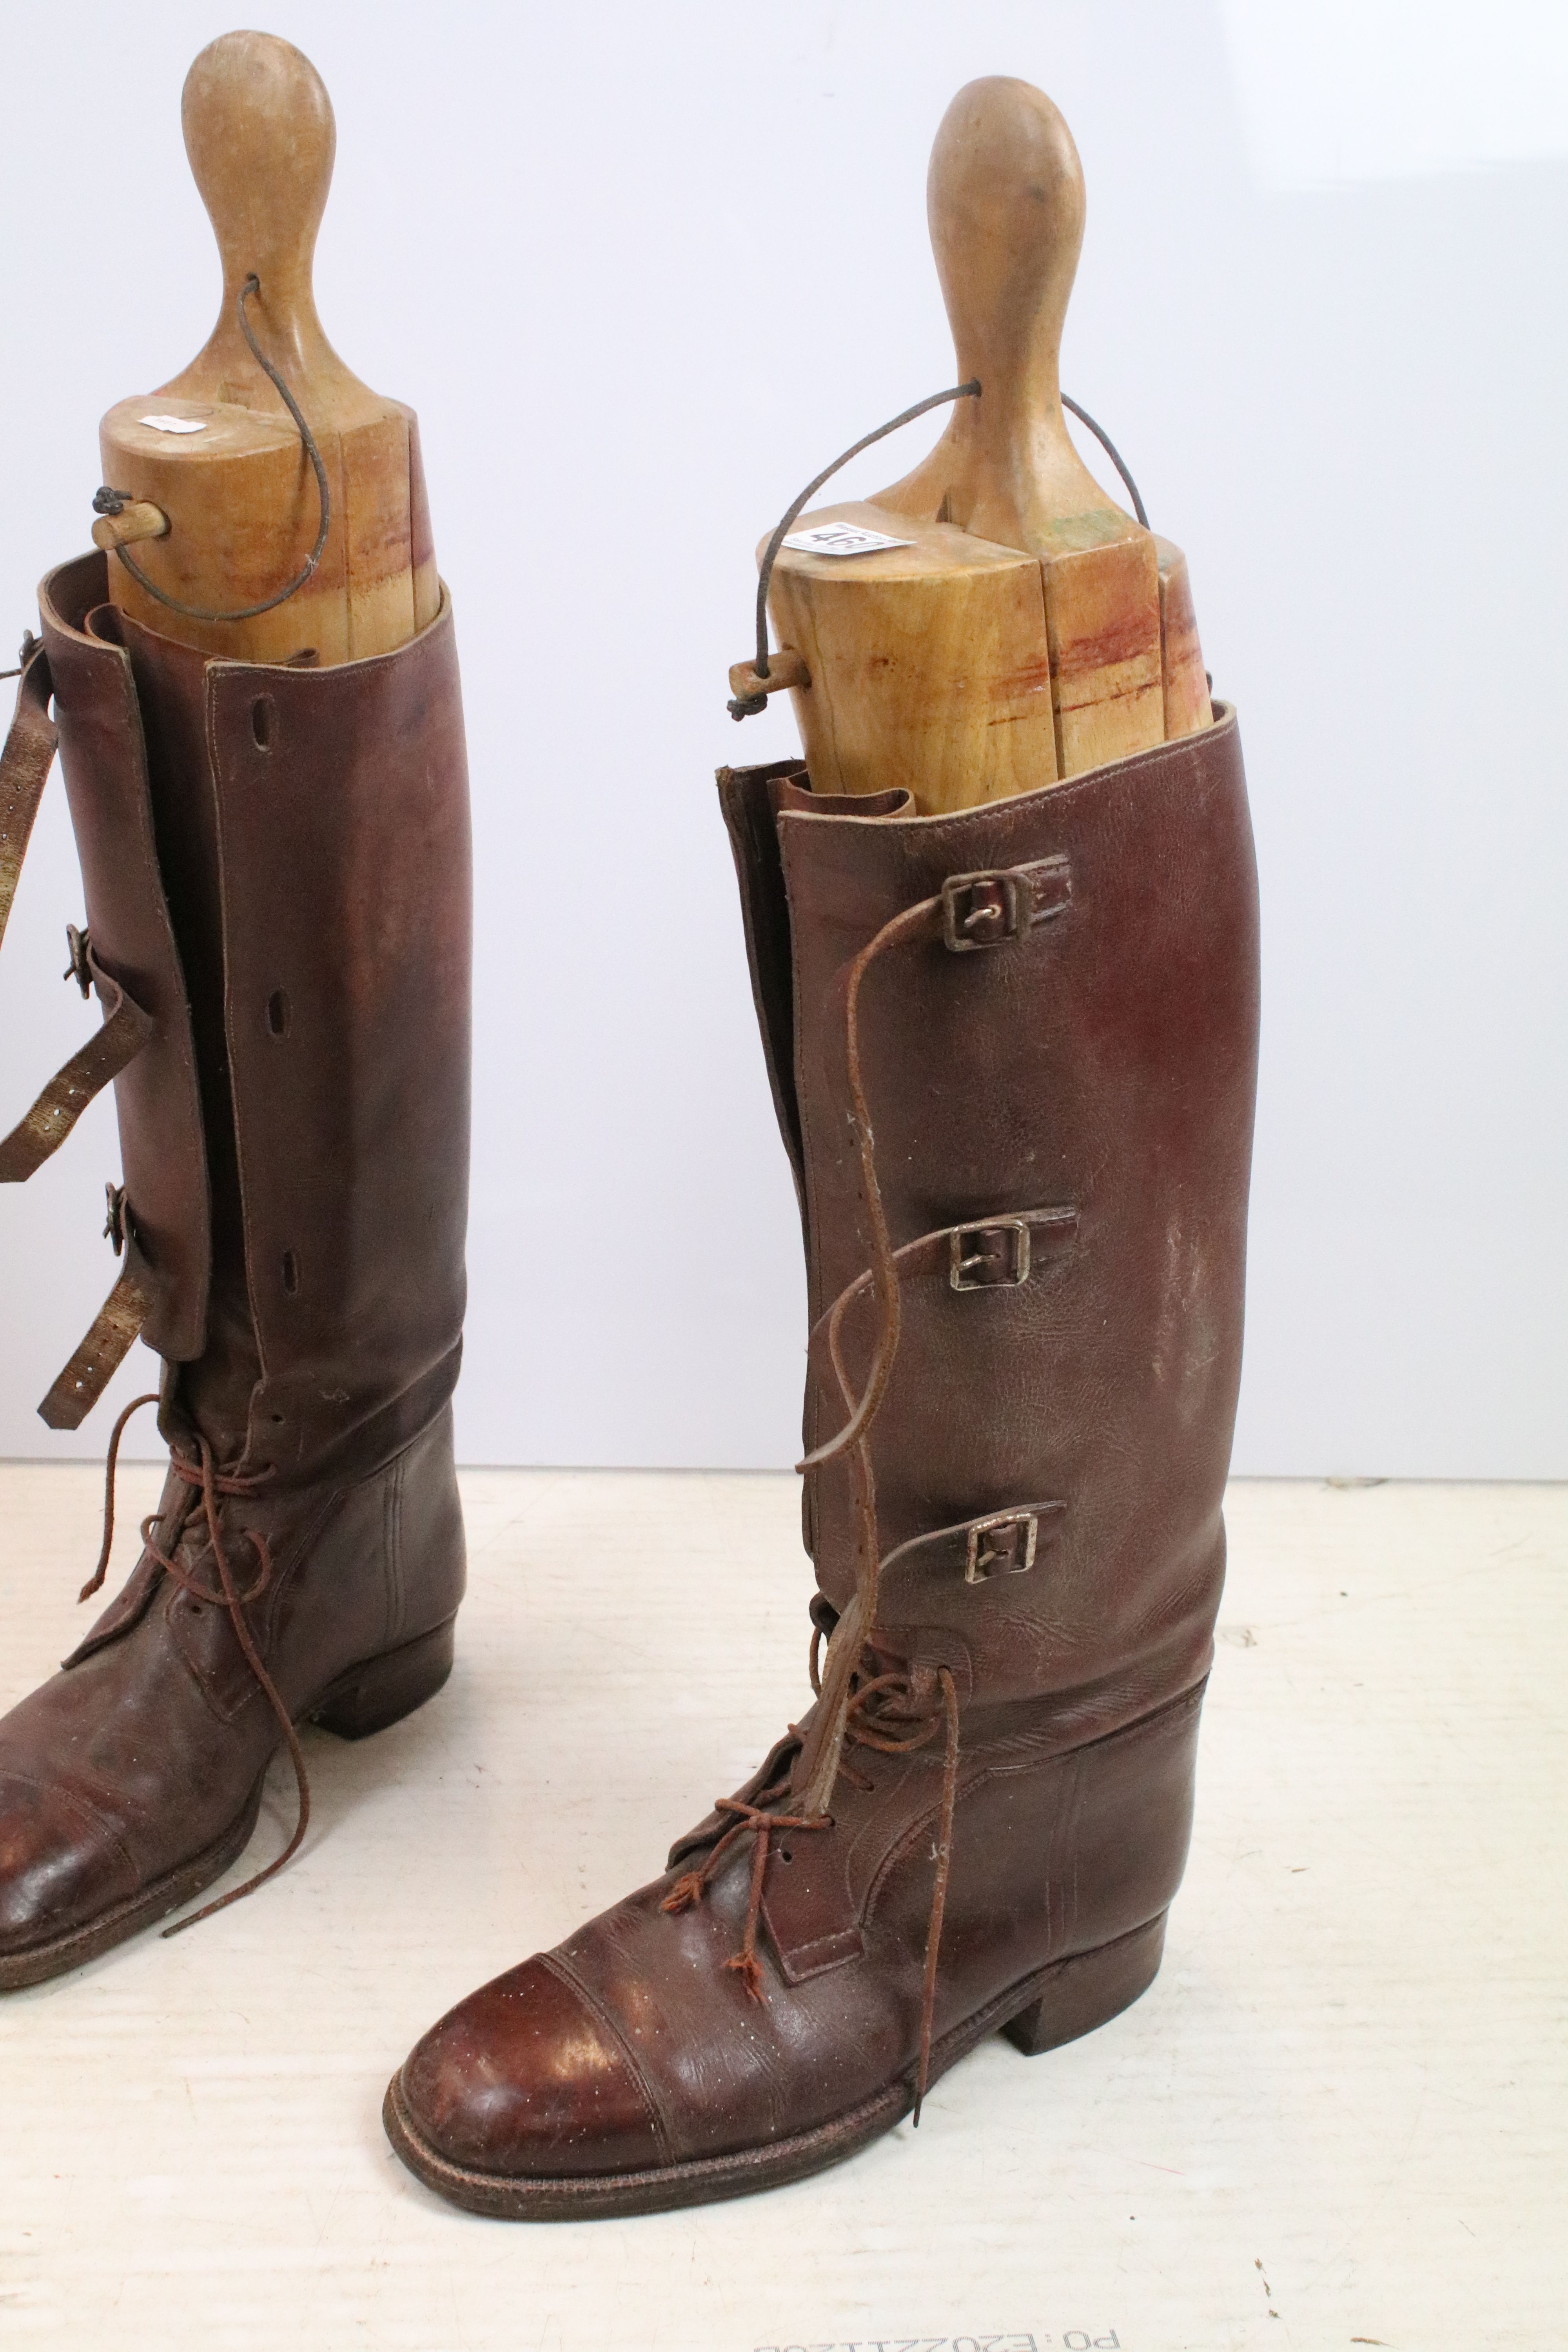 Pair of John Lobb laced leather riding boots with wooden trees - Image 2 of 3